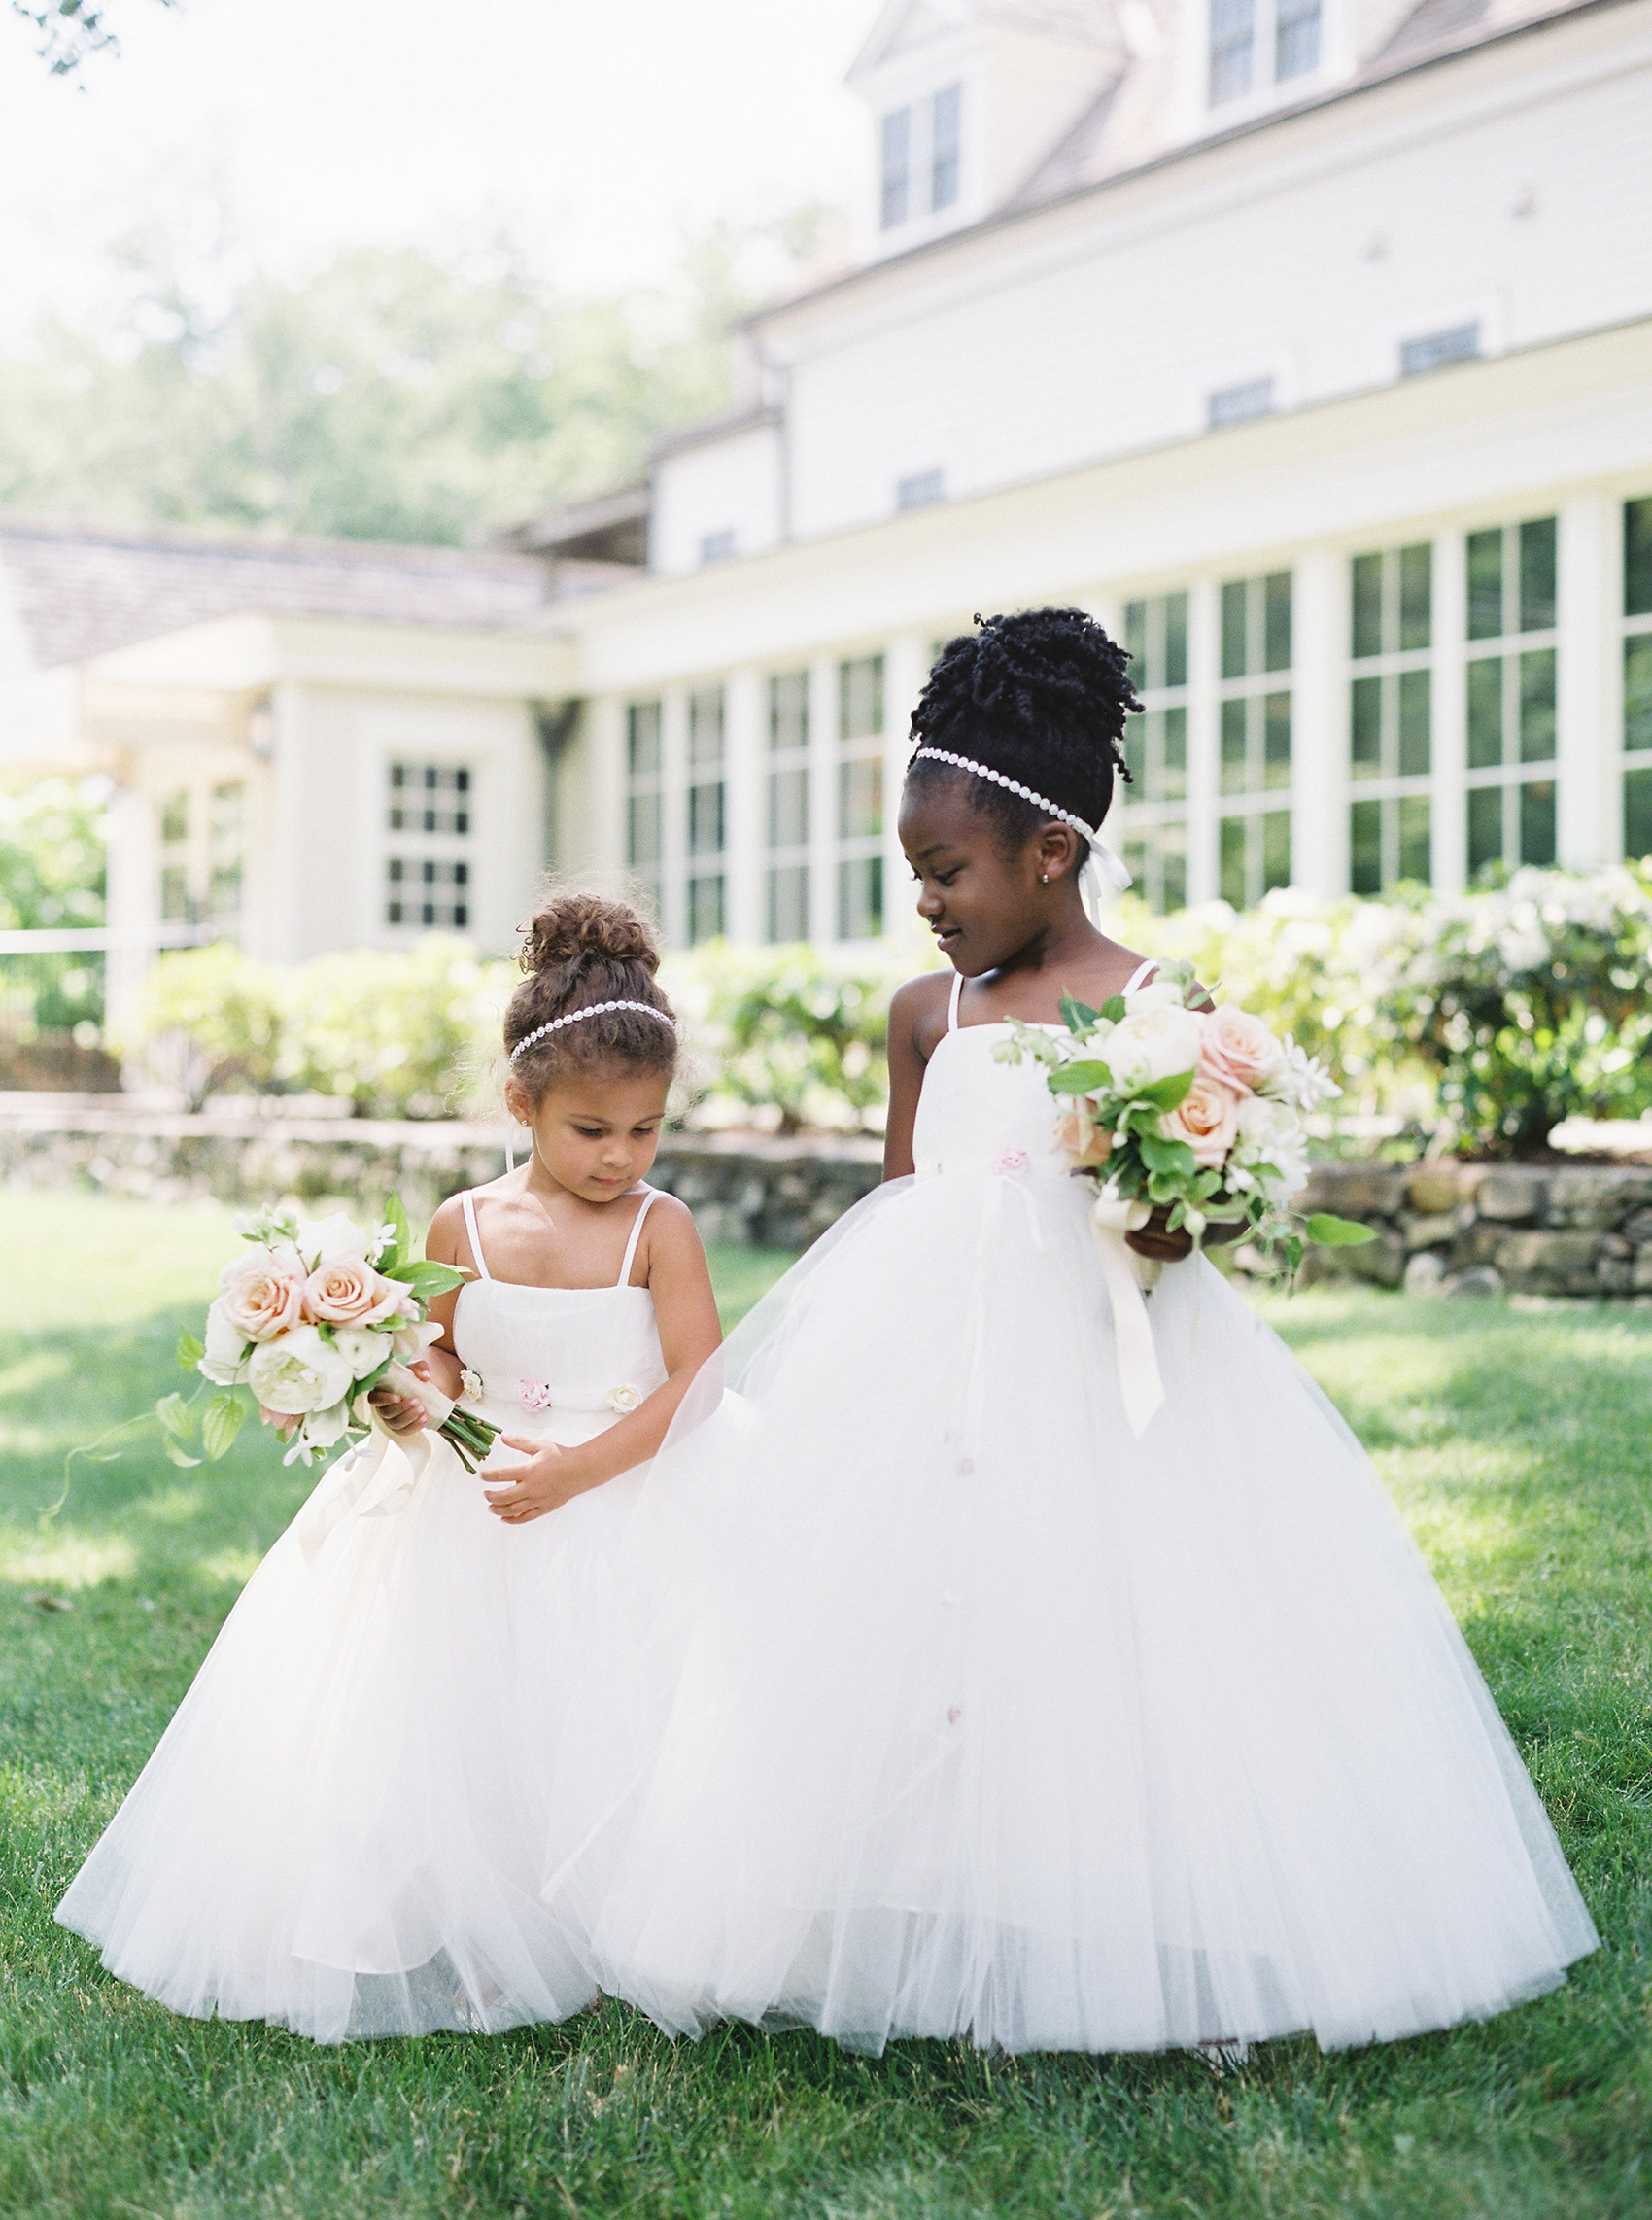 Black Flower Girl Hairstyles
 Adorable Hairstyle Ideas for Your Flower Girls